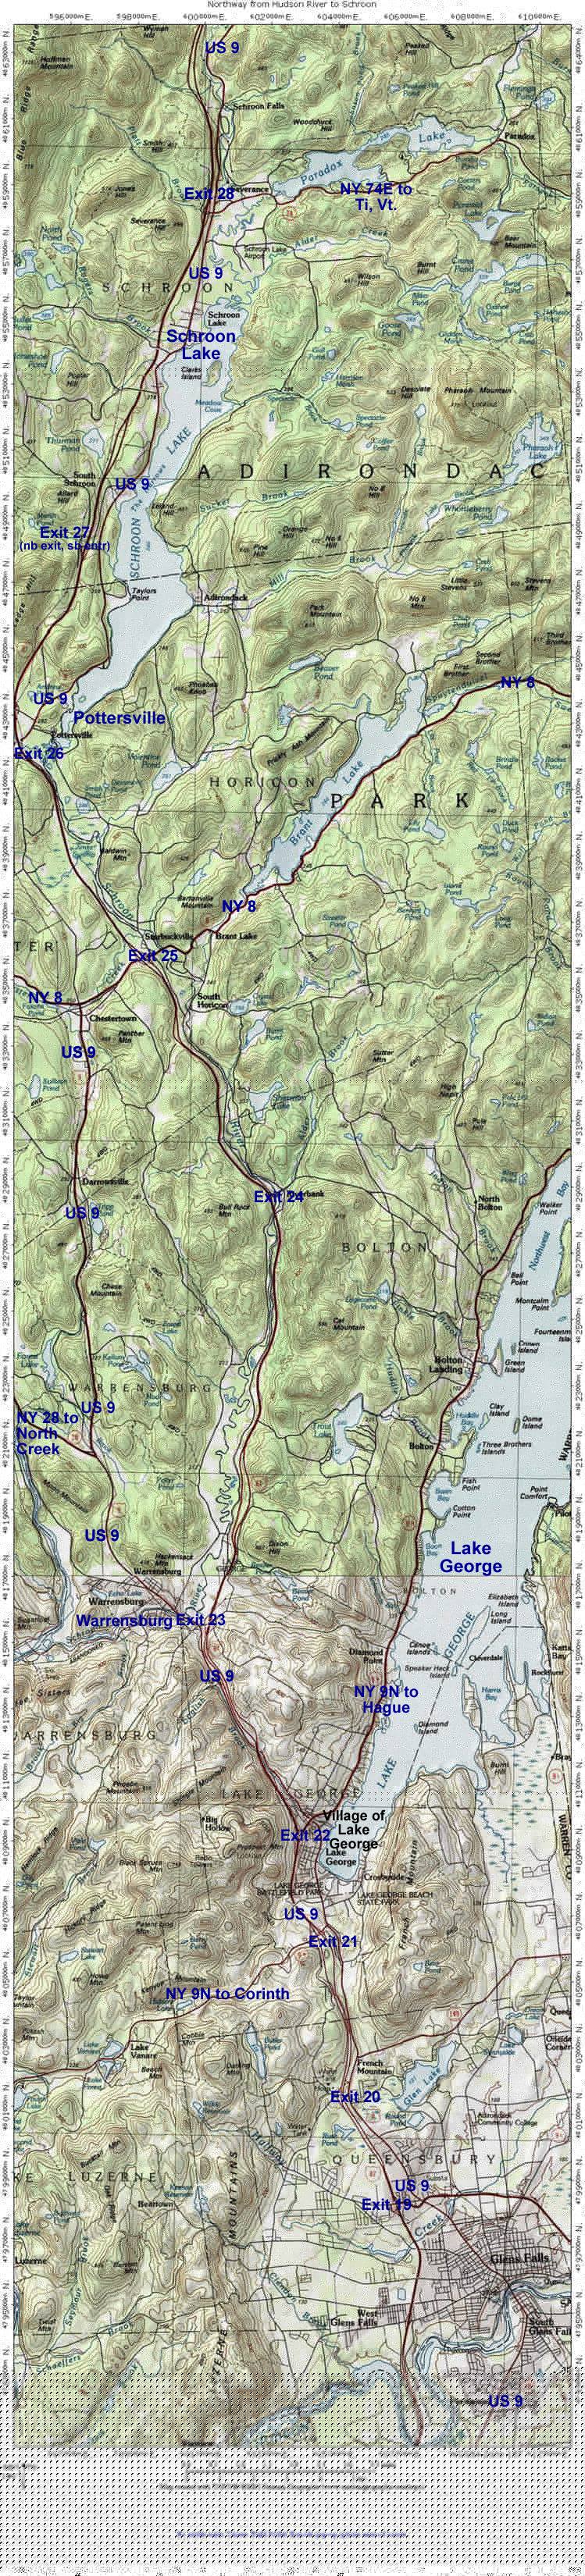 Road Map #2: From Glens Falls to Schroon Lake